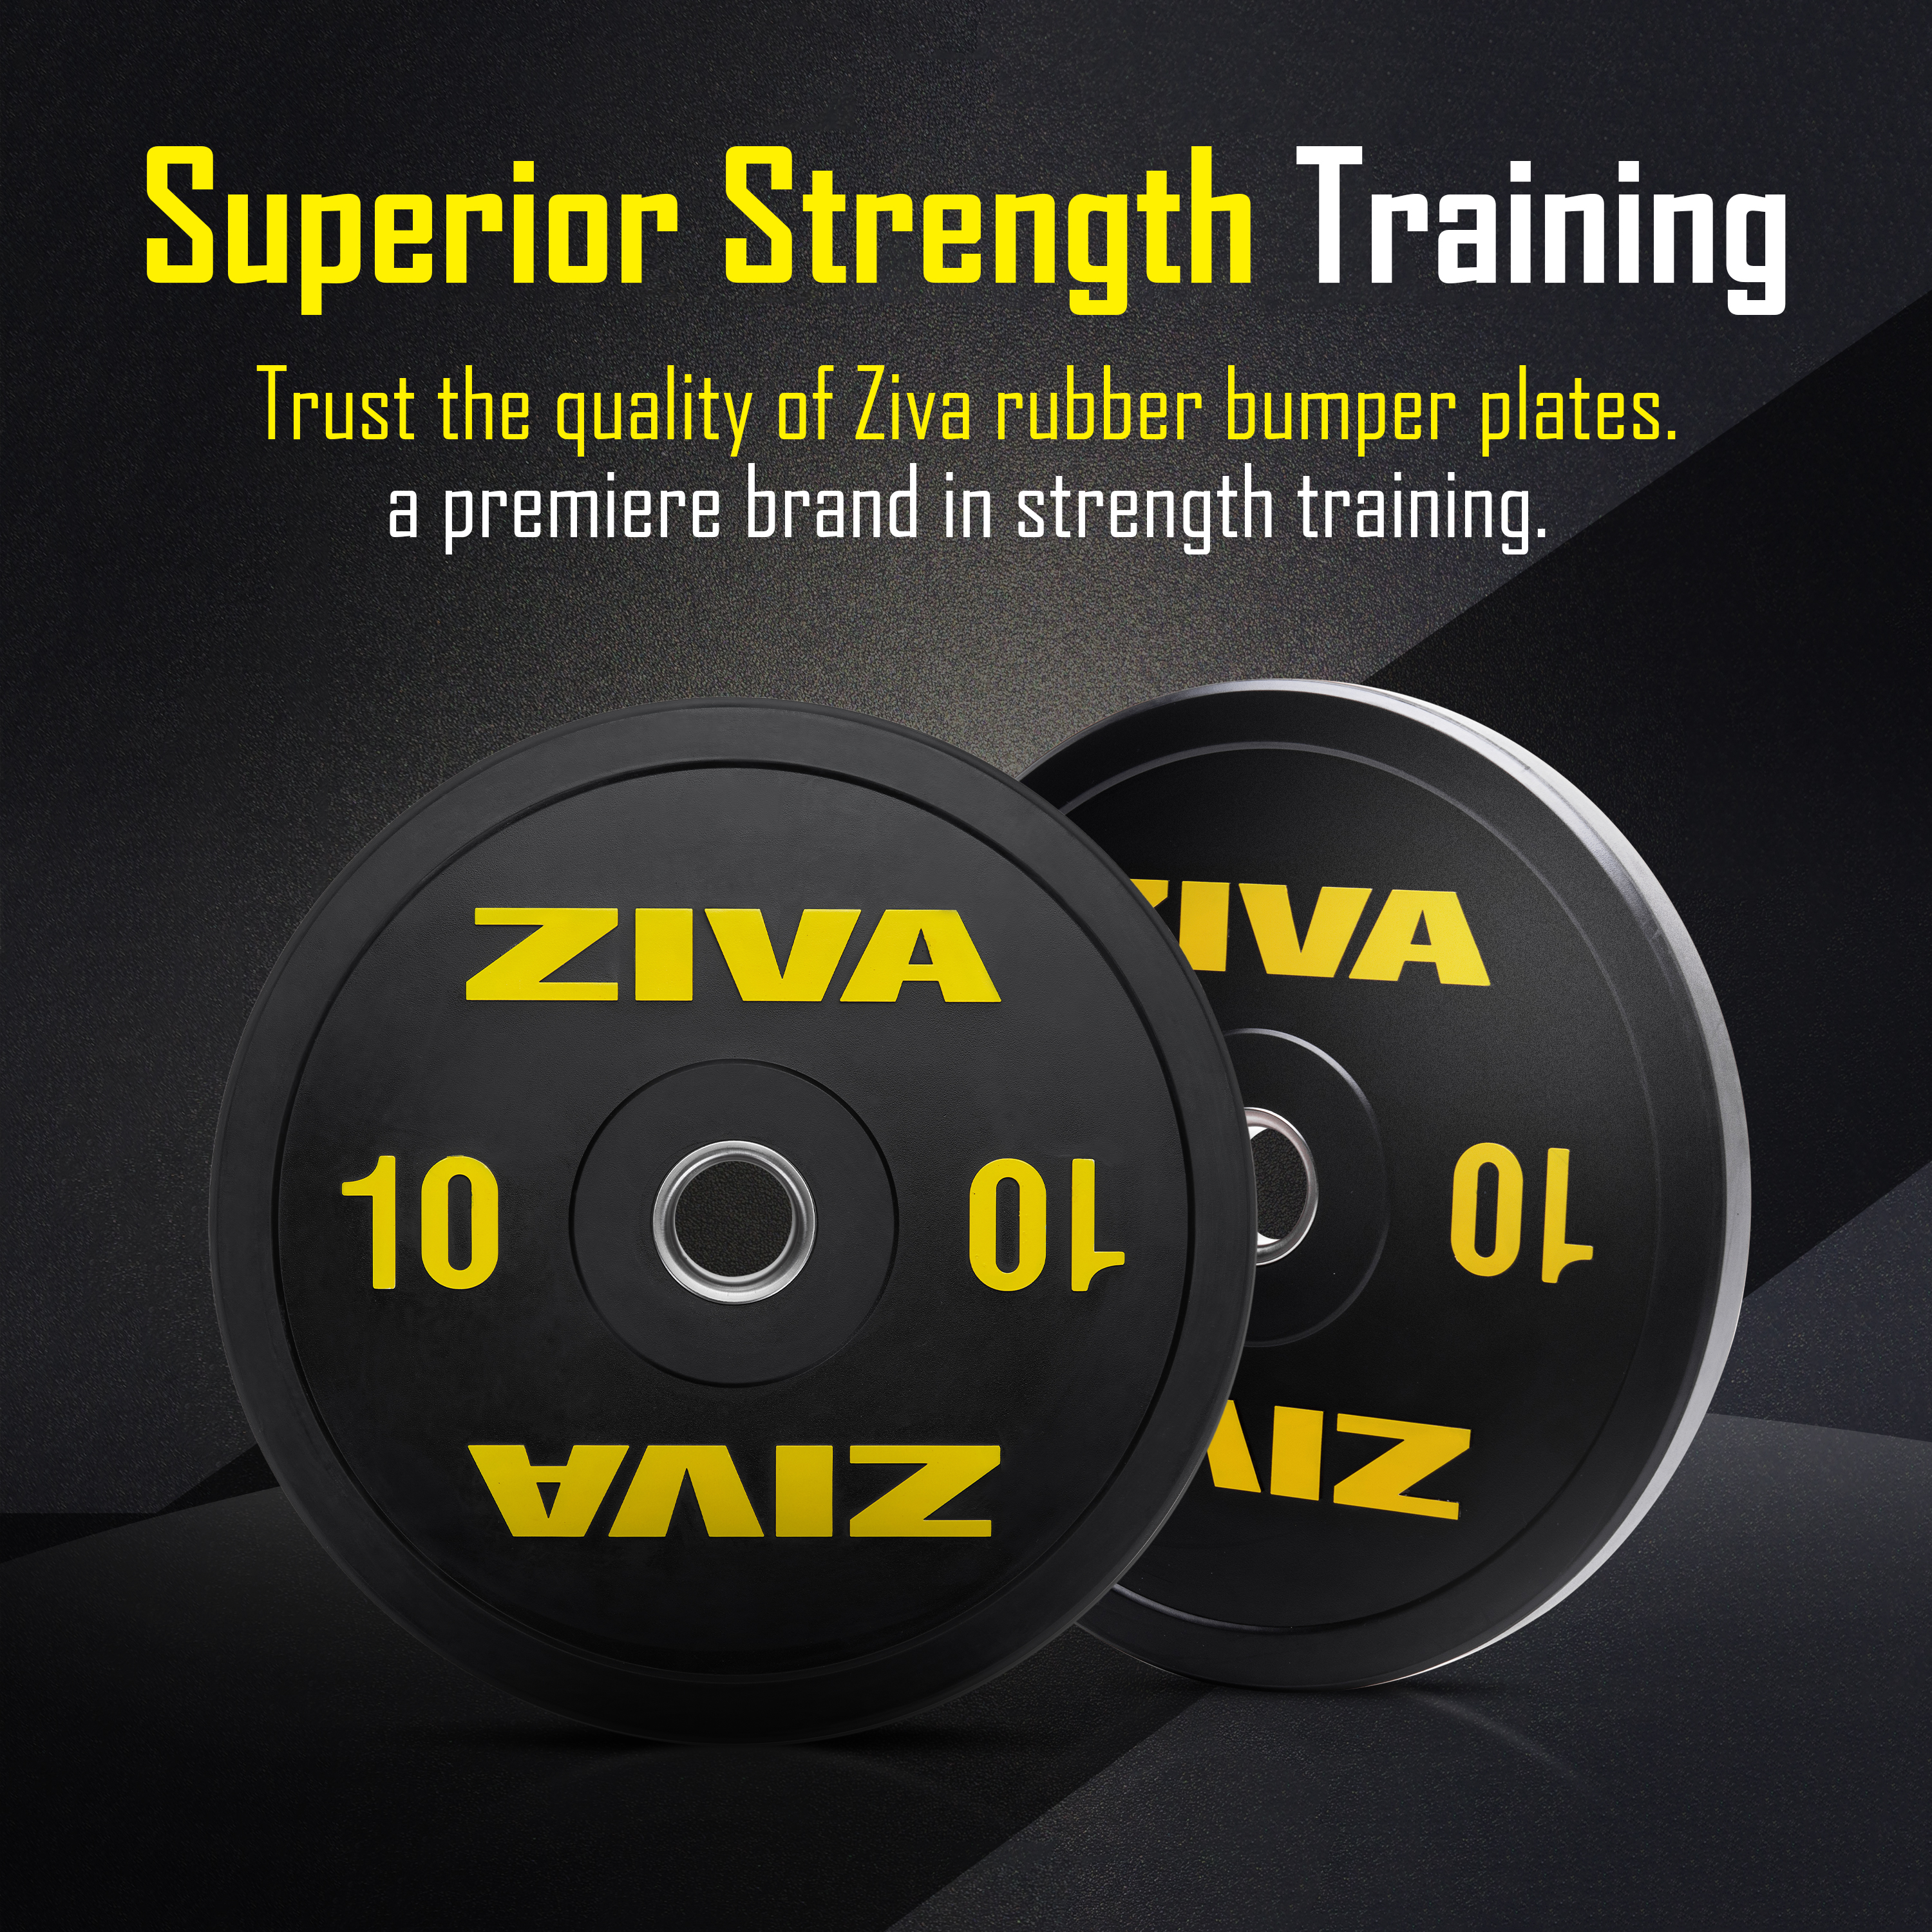 Superior strength training. Trust the quality of Ziva rubber bumper plates. A premiere brand in strength training.